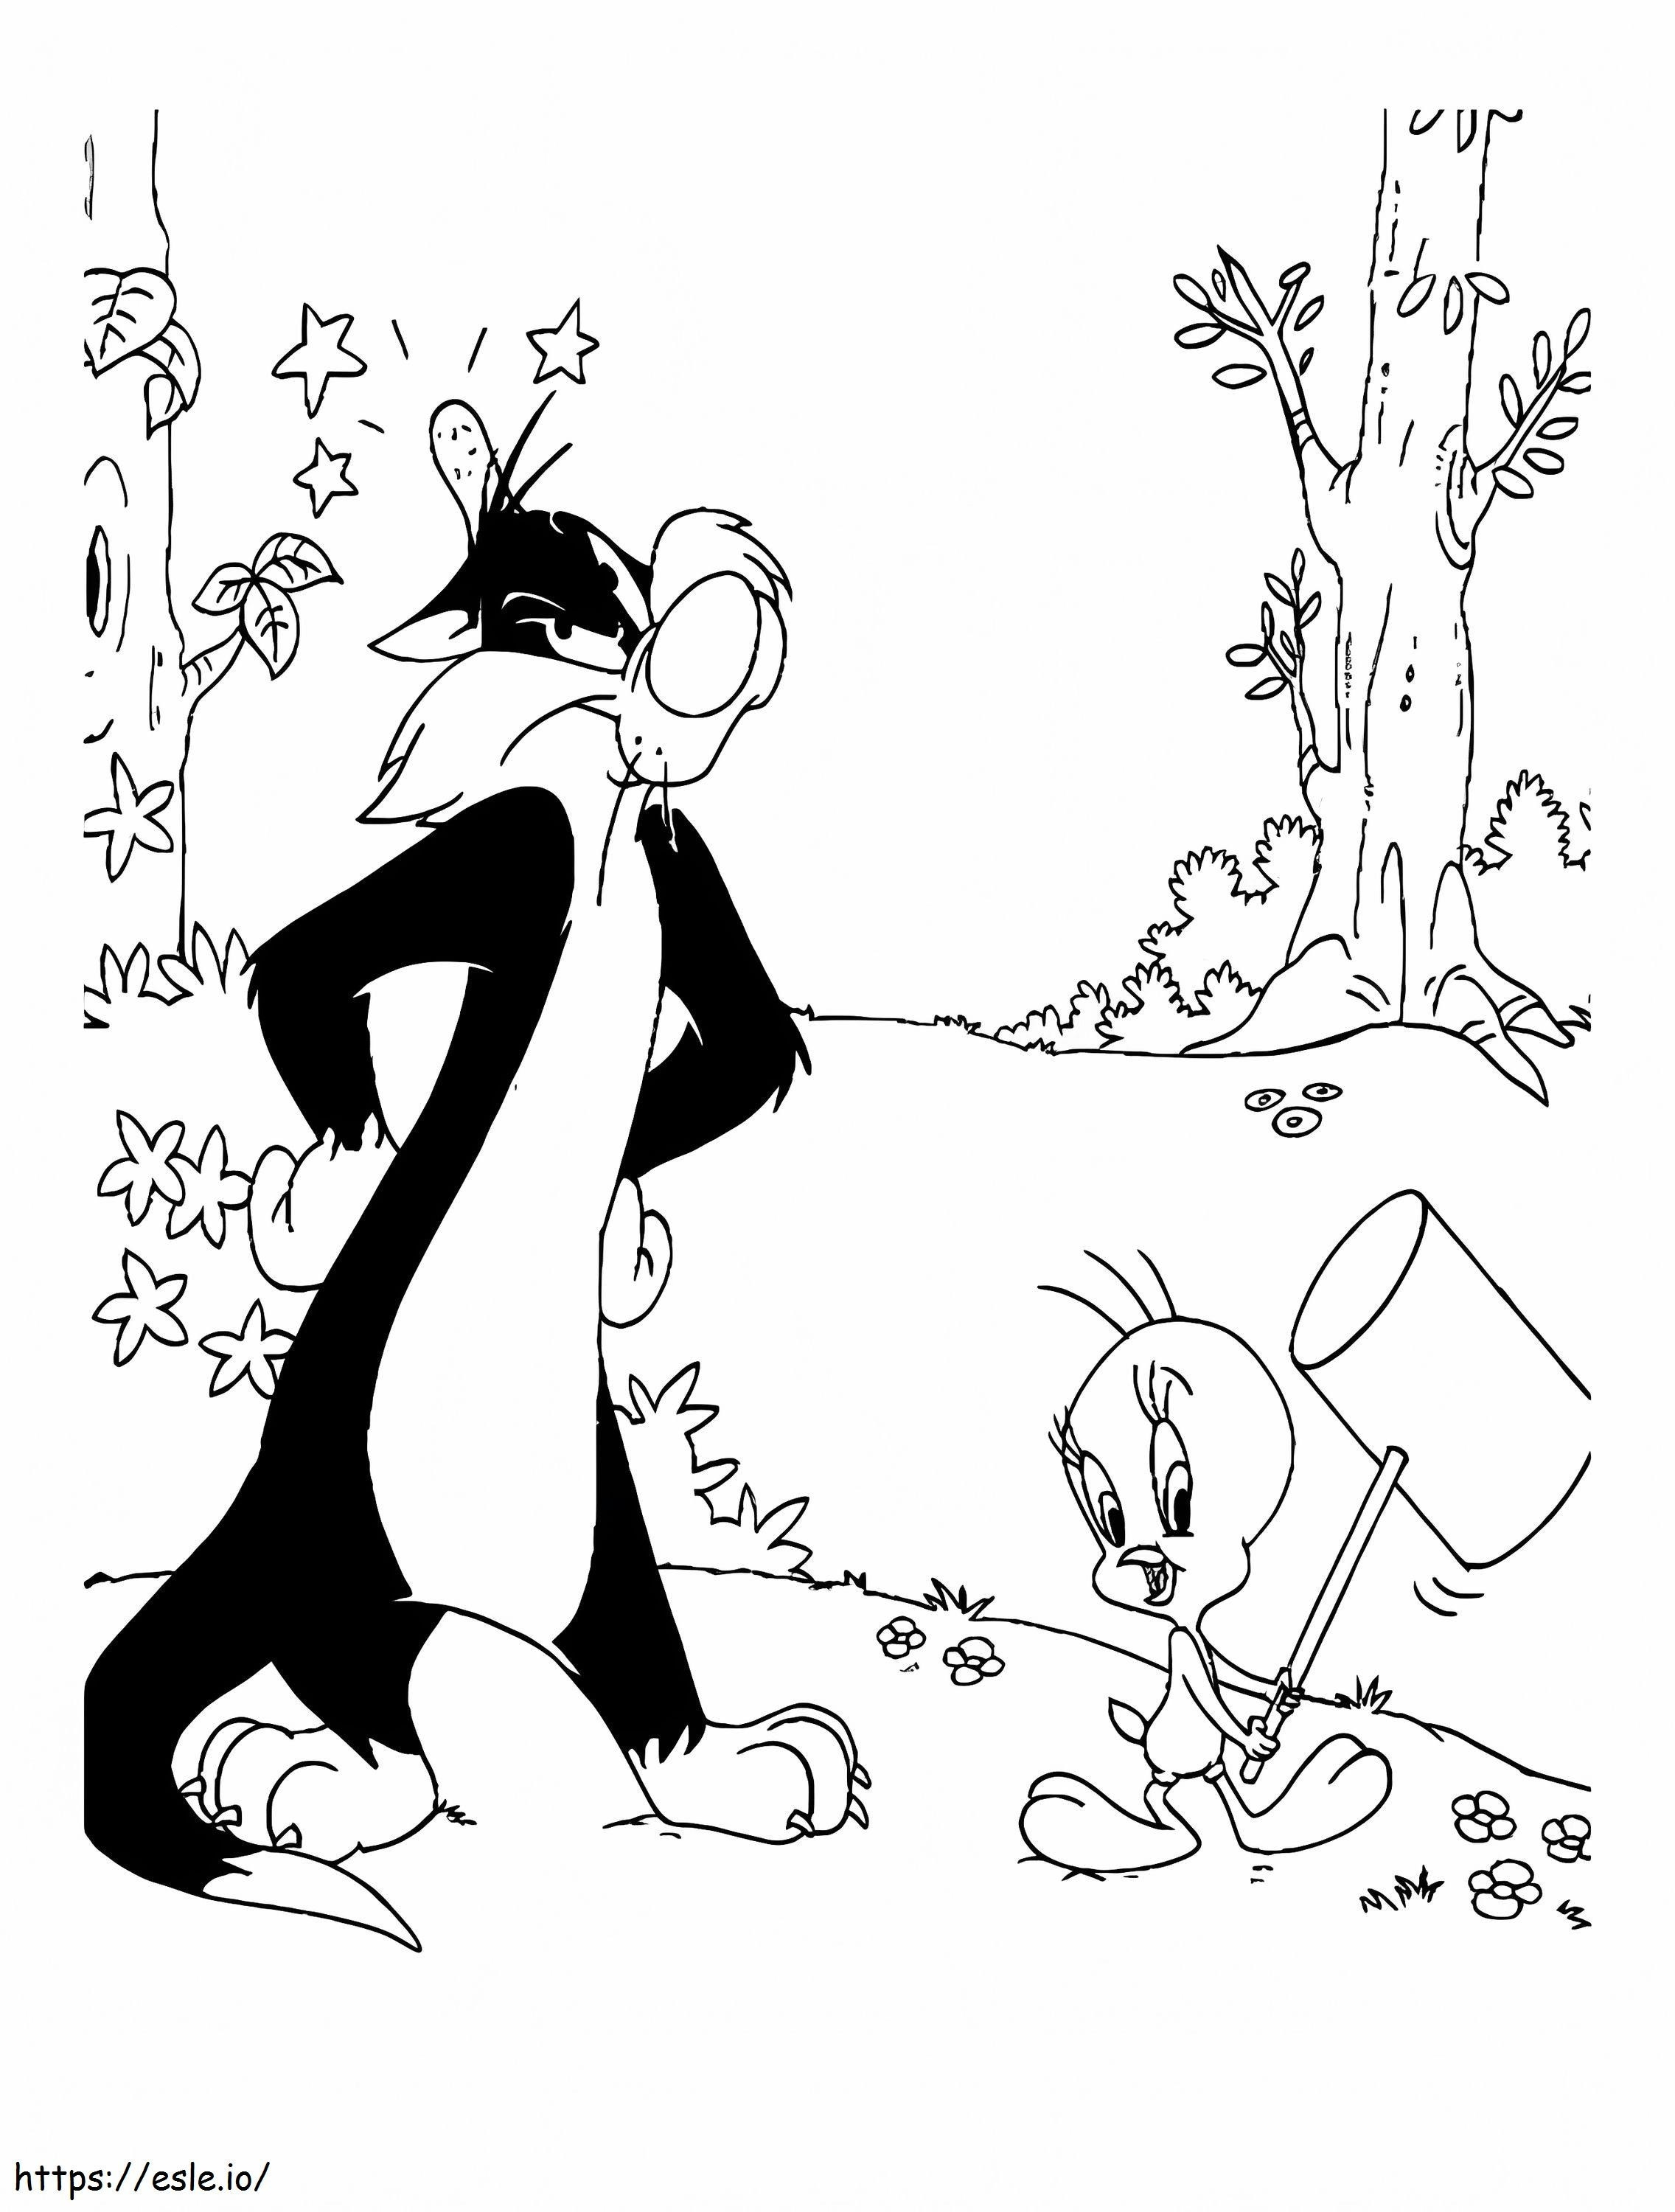 Free Sylvester coloring page